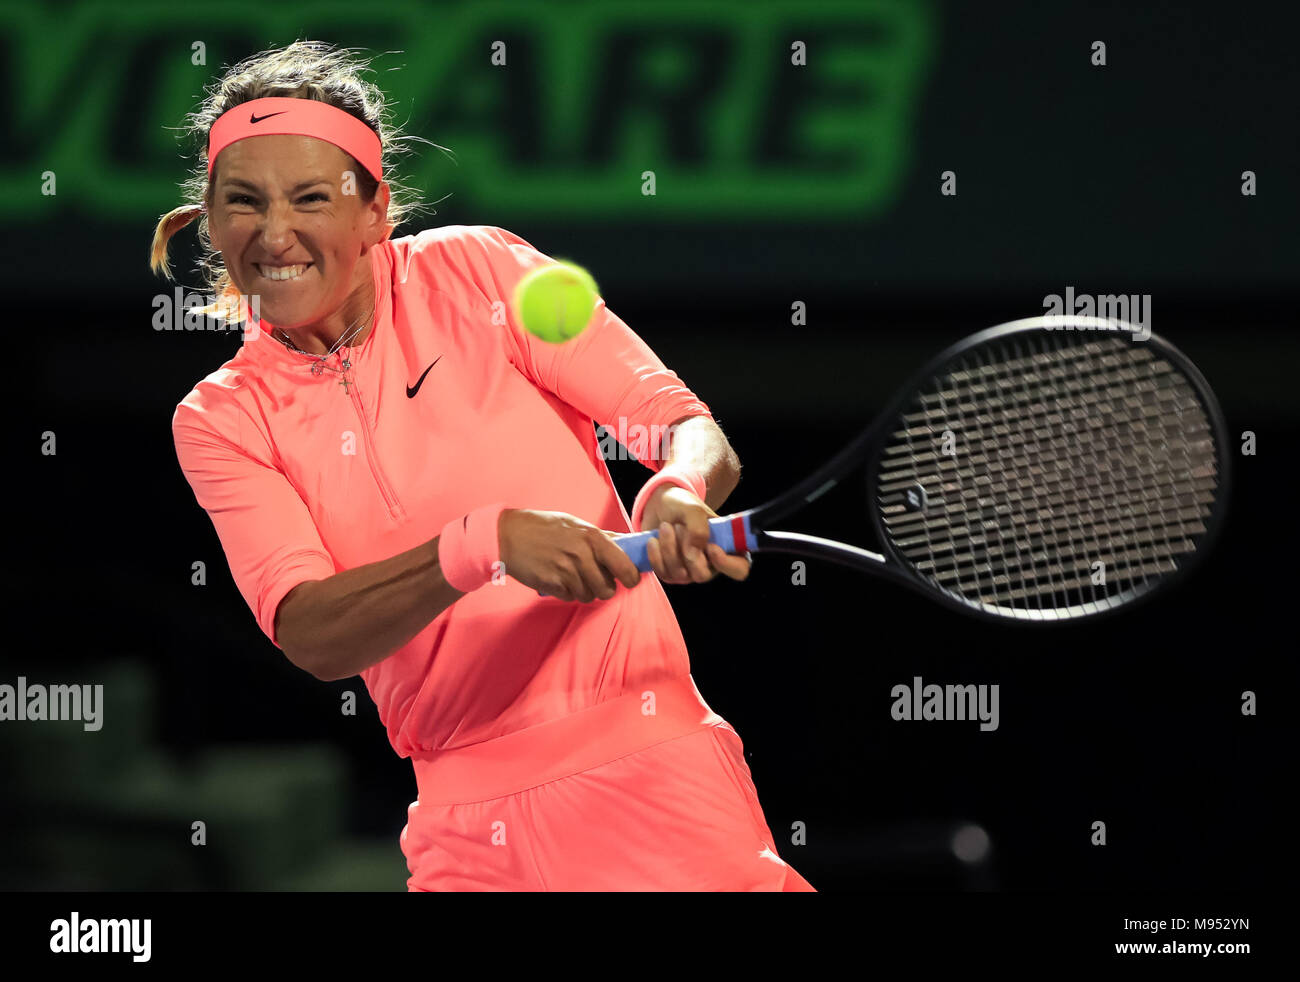 Key Biscayne, Florida, USA. 22nd Mar, 2018. Victoria Azarenka from Belarus plays against Madison Keys from the United States of America during an early round of the 2018 Miami Open presented by Itau professional tennis tournament, played at the Crandon Park Tennis Center in Key Biscayne, Florida, USA. Azarenka won 7-6(5), 2-0 (Ret). Mario Houben/CSM/Alamy Live News Stock Photo